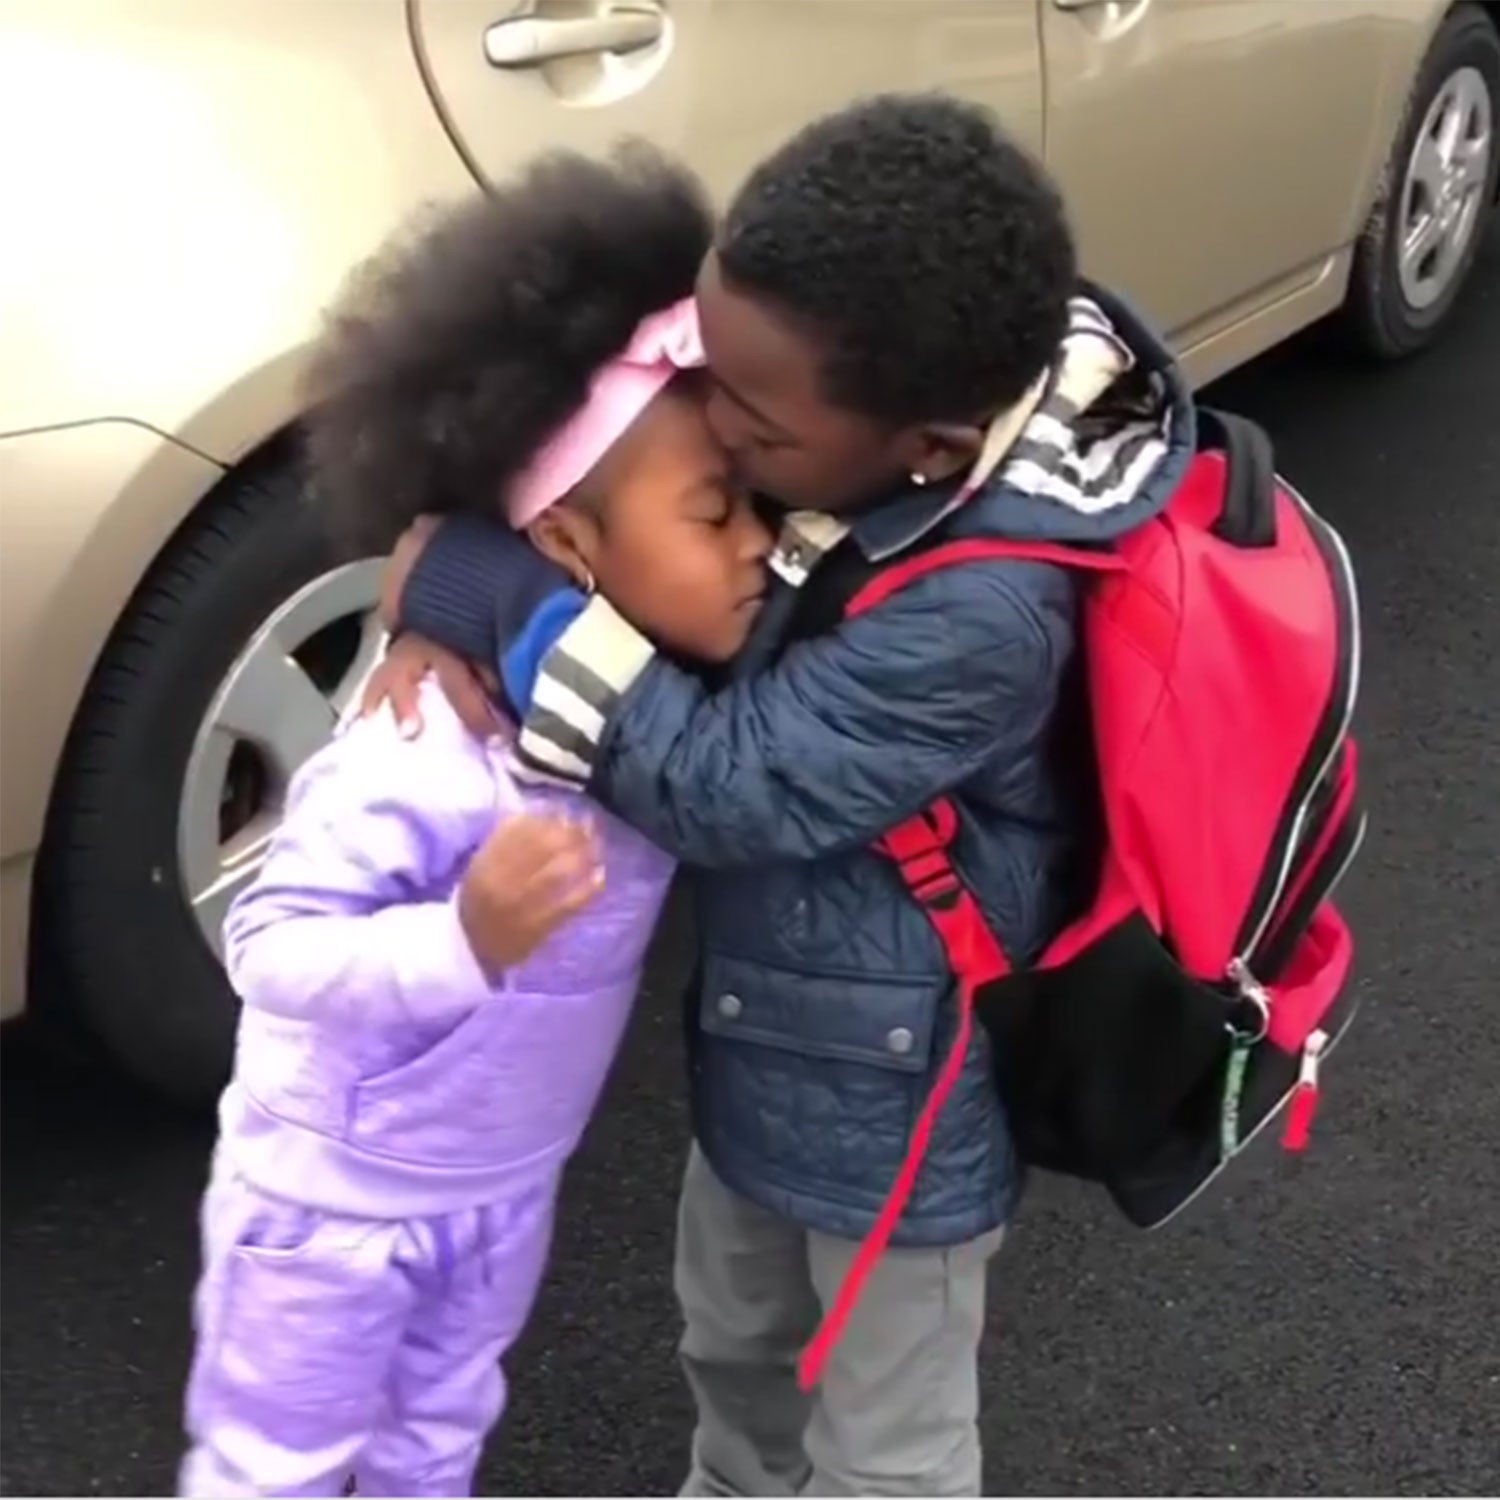 Brother And Sister's Sweet Reunion After A Long Day Of Kindergarten Will Make Your Week
